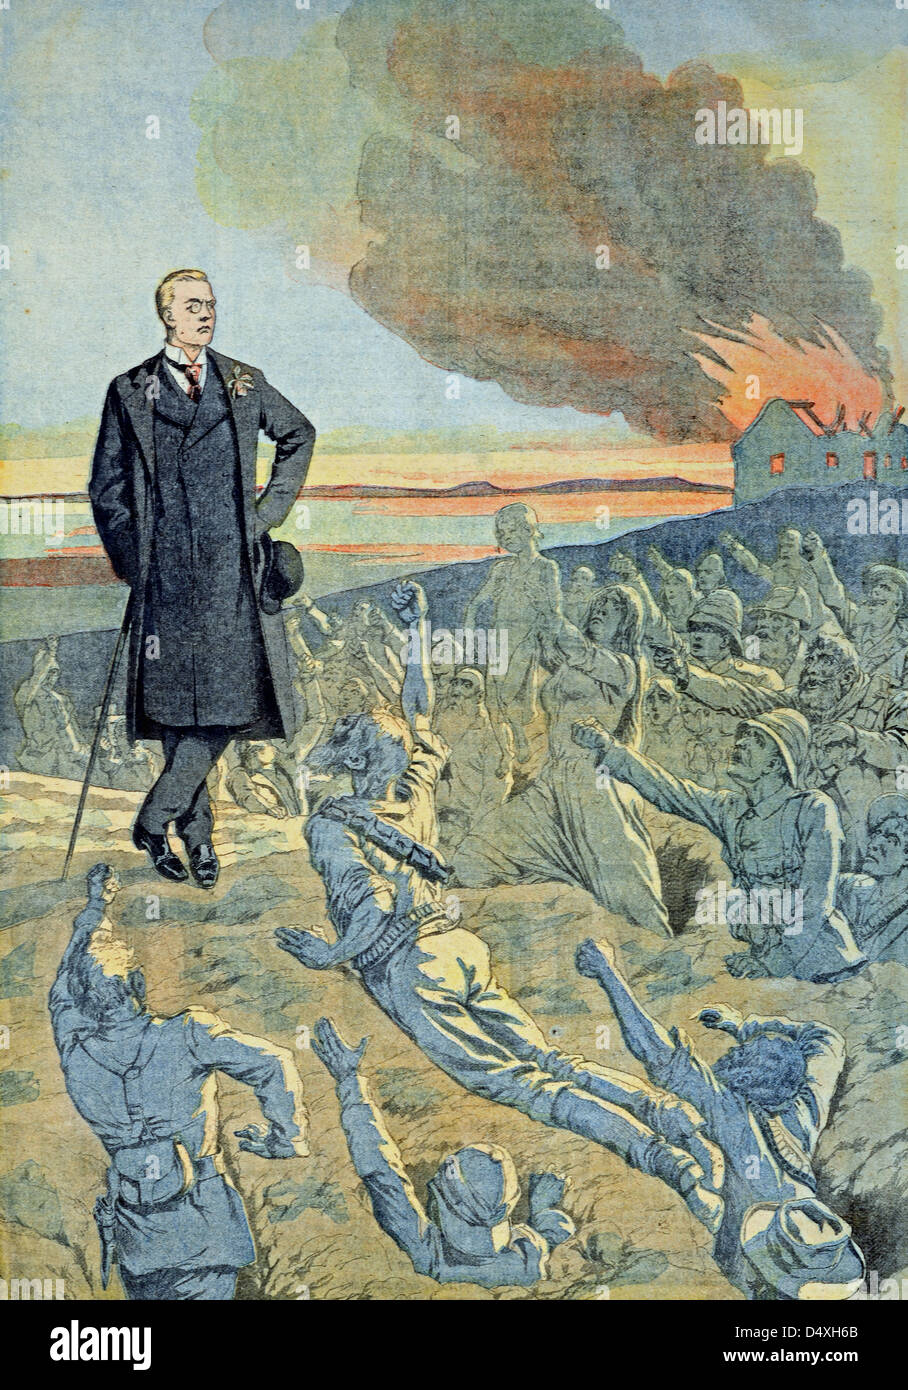 Joseph Chamberlain Pictured during the Boer War in South Africa (Jan 1903) Vintage Engraving or Illustration Stock Photo